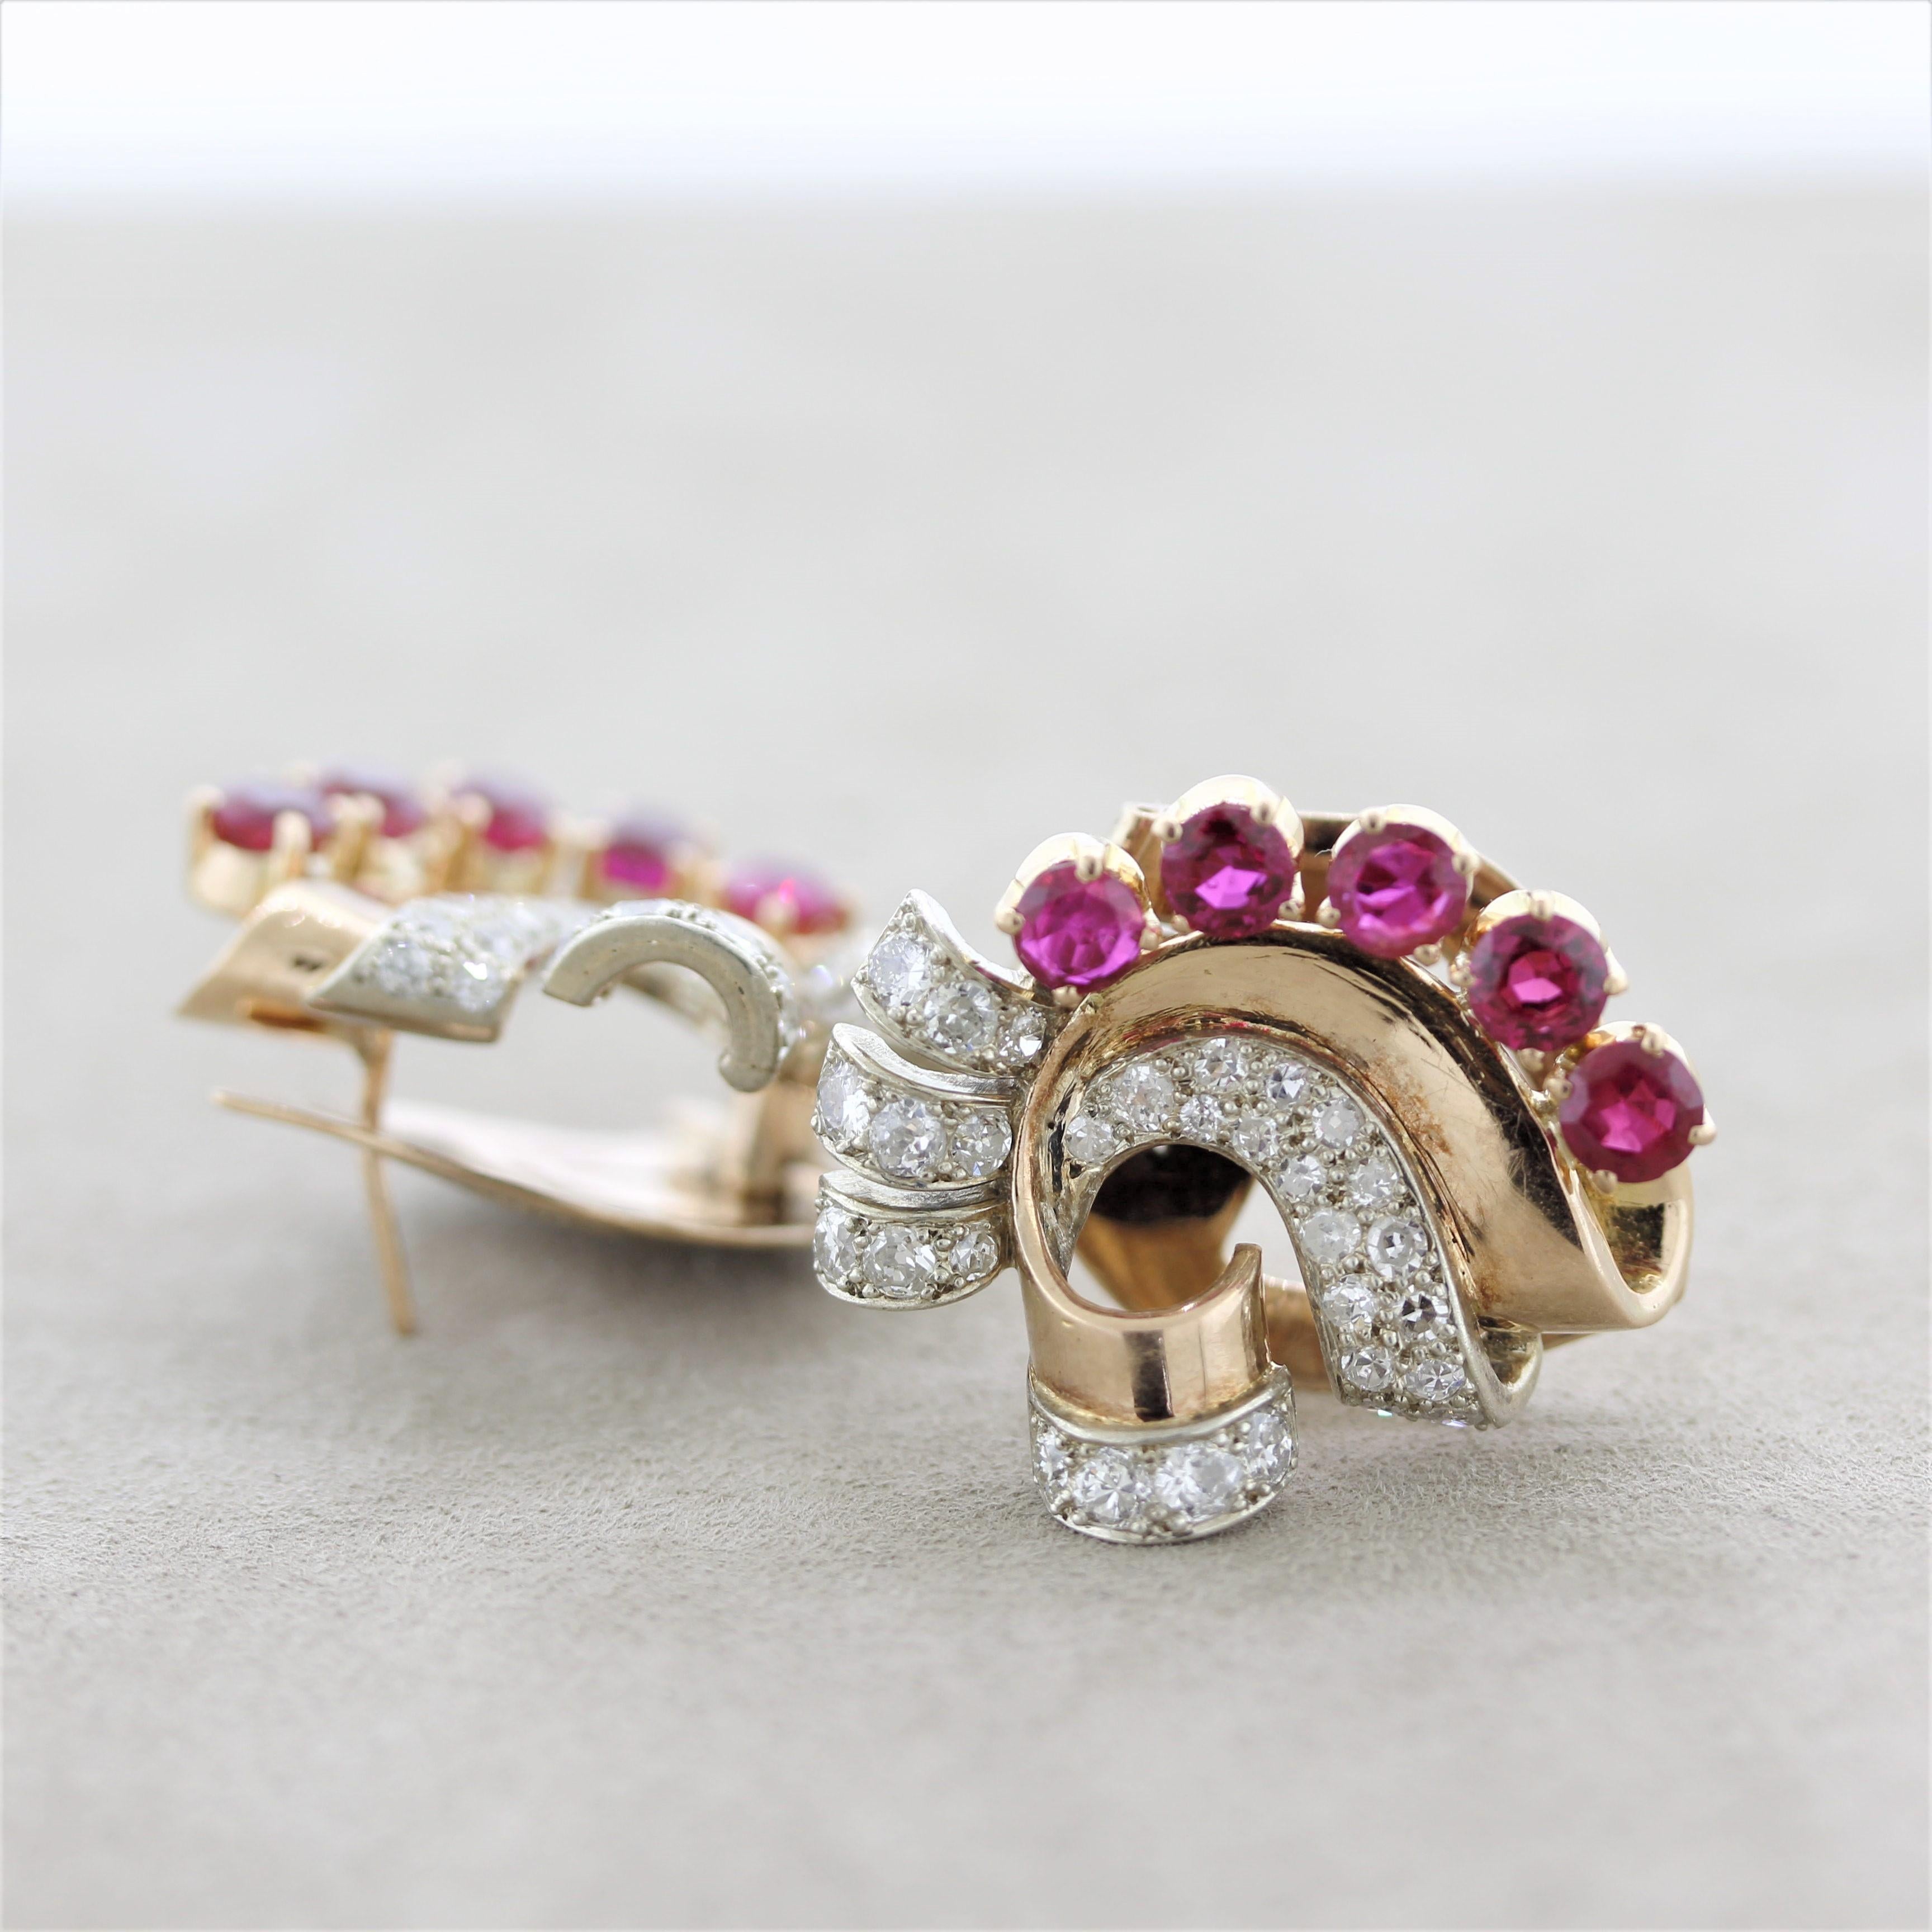 An original retro piece from the 1930’s featuring European-cut diamonds and vivid red pigeon blood rubies. In classic retro style, the piece is made in a rosy colored gold as well as white gold for a two-tone style. Approximately 1.50 carats of